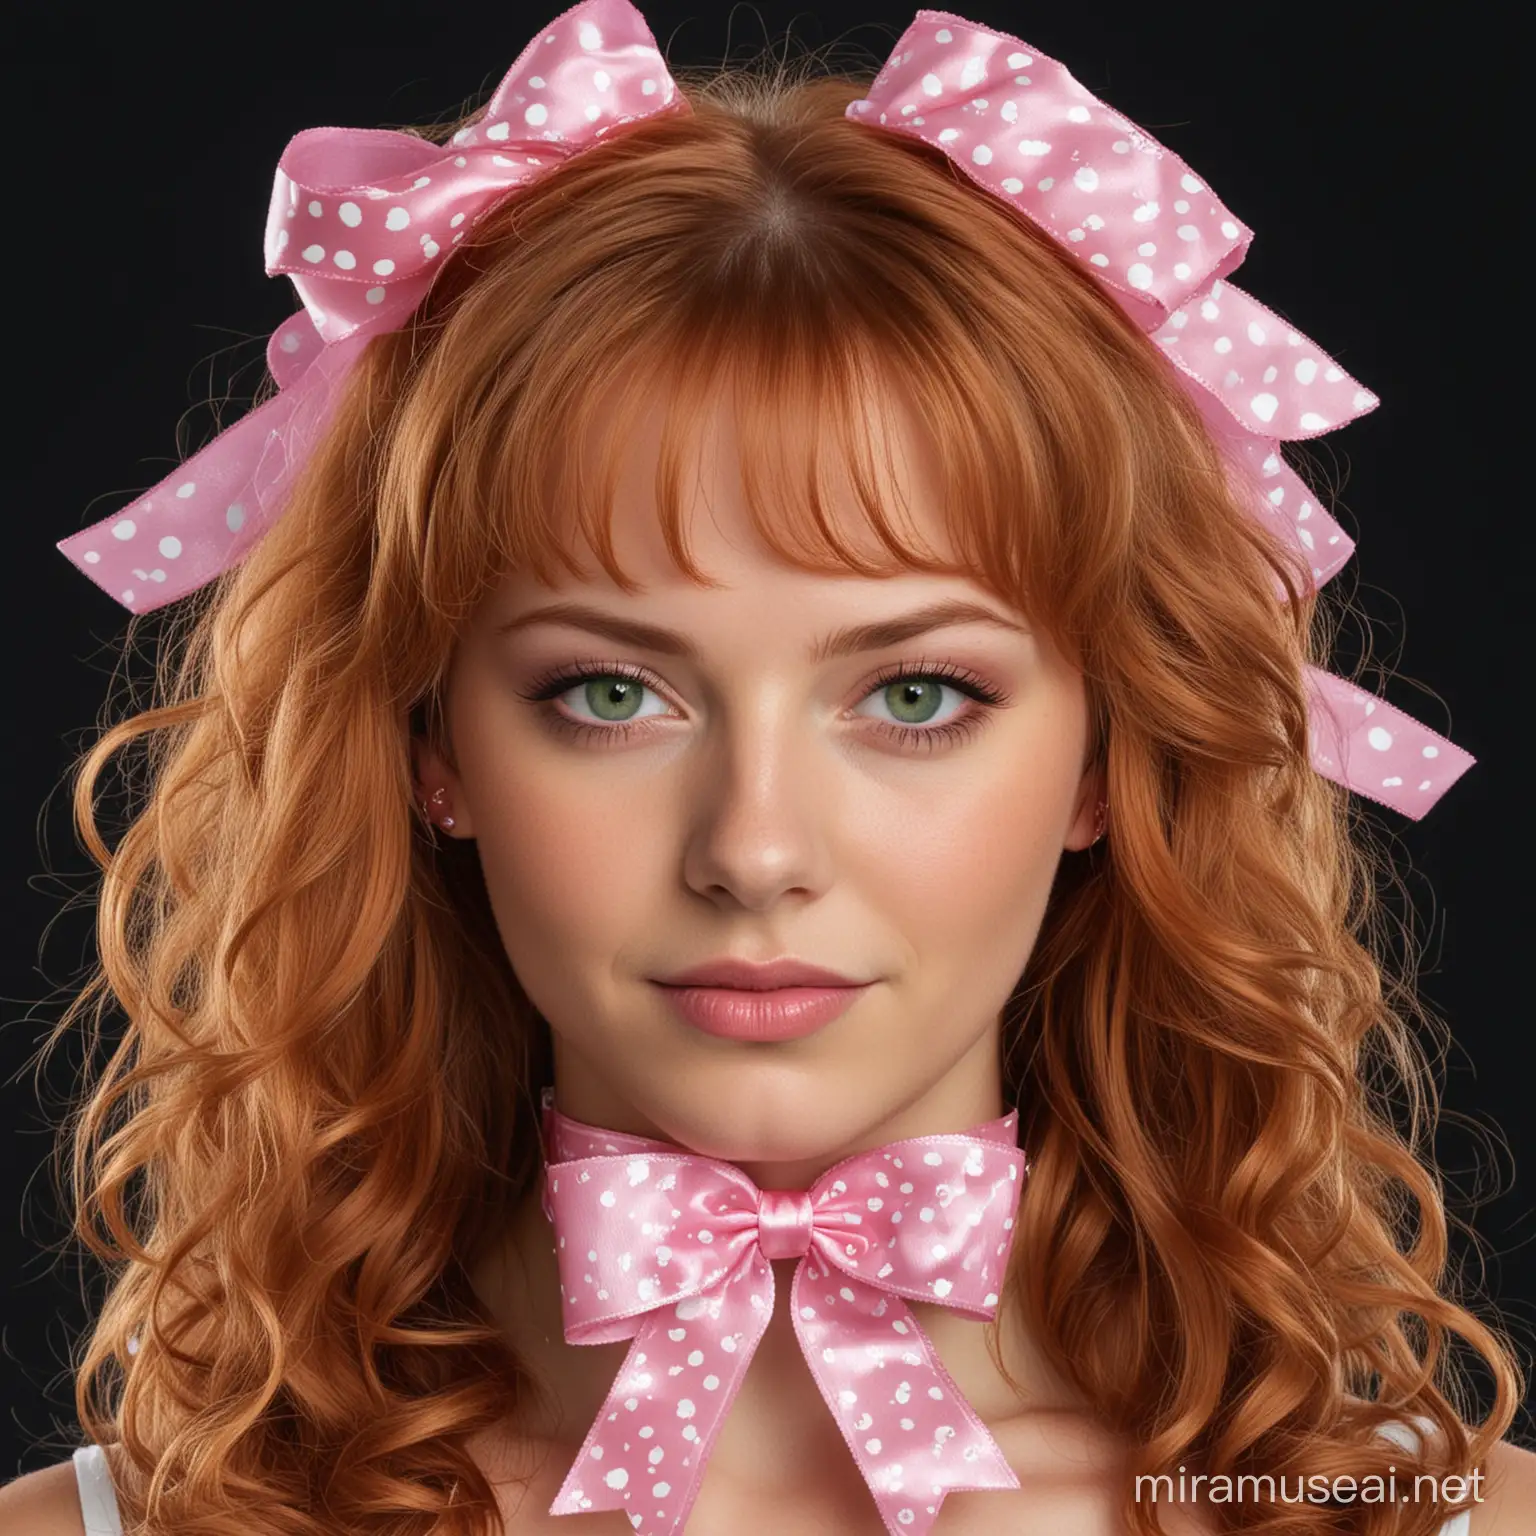 Portrait of a GreenEyed Woman with Ginger Hair and Pink Ribbons on Black Background